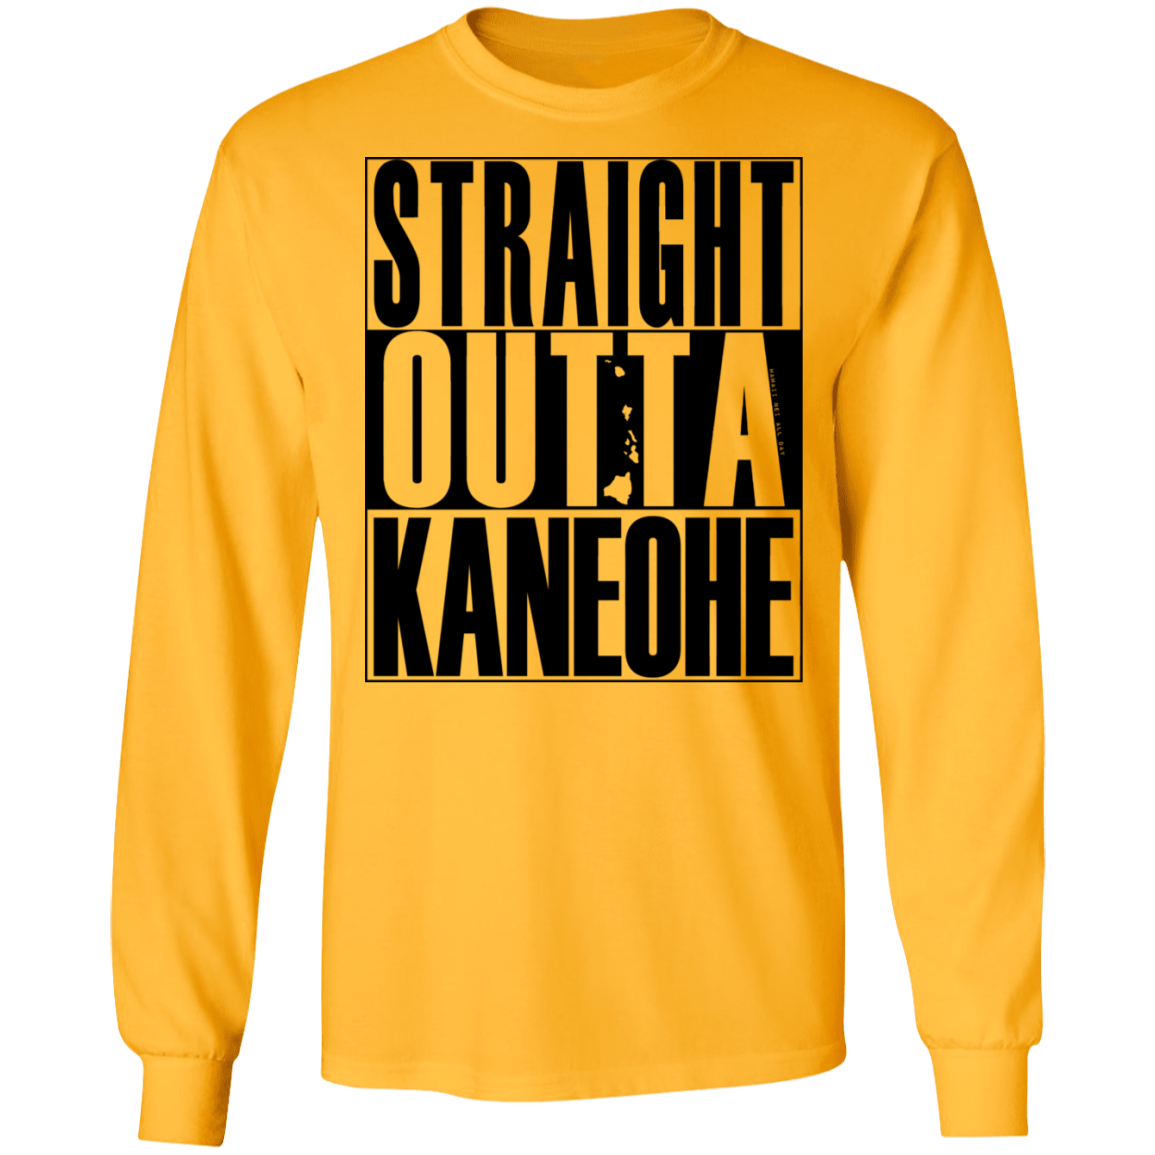 Straight Outta Kaneohe (black ink) LS T-Shirt